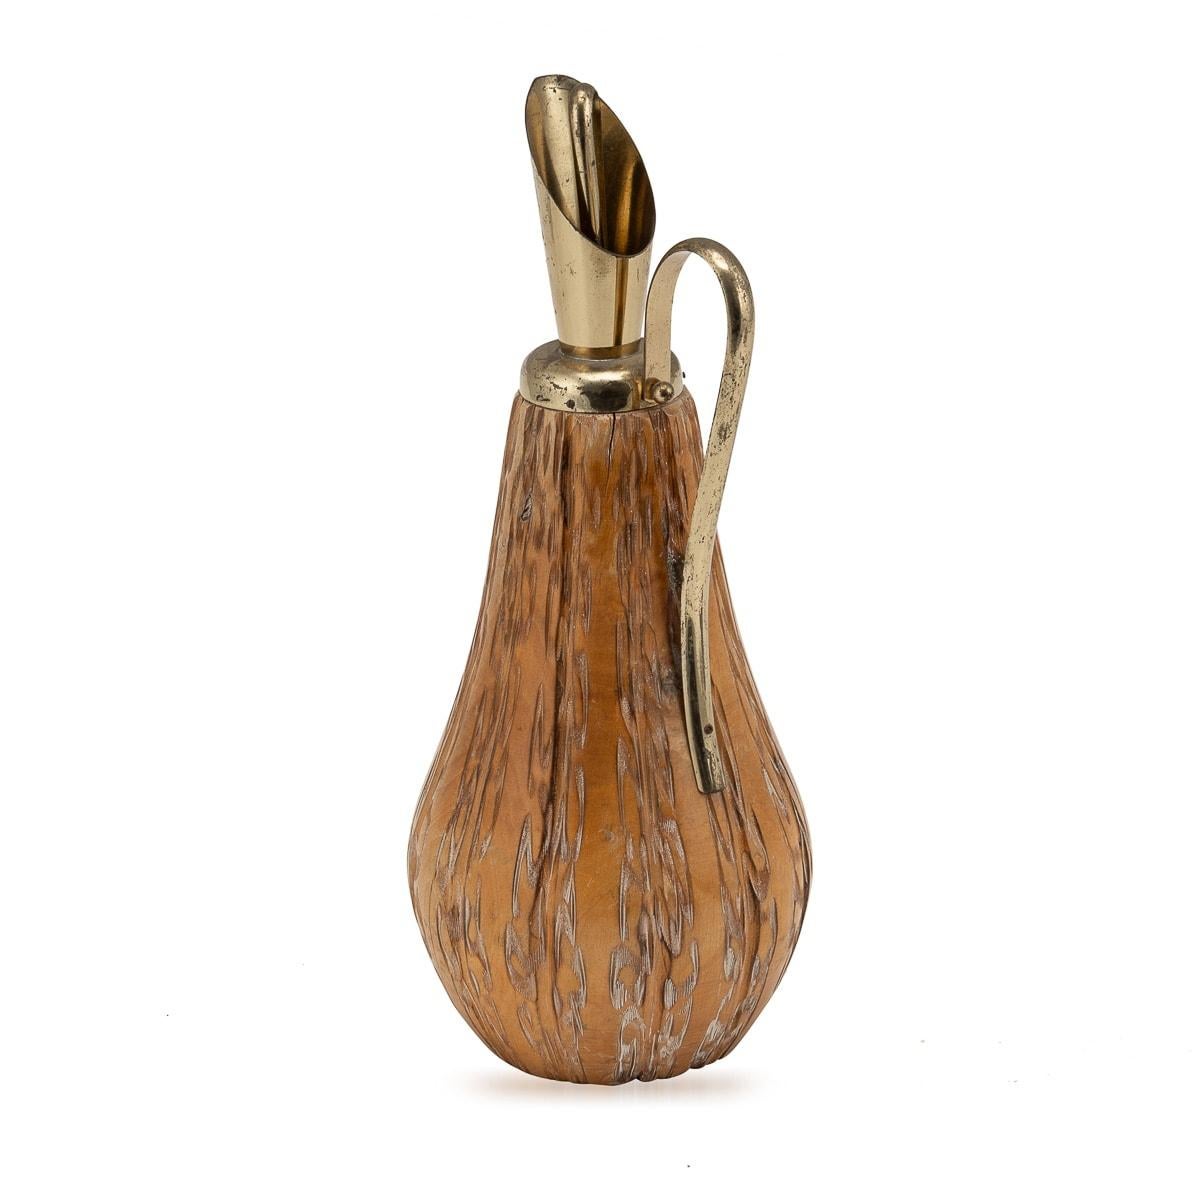 An Aldo Tura wood flask crafted for Macabo, Cusano Milanino, made in Italy around the 1960s. This exquisite piece reflects the distinctive style of Aldo Tura, a renowned Italian designer known for his innovative and luxurious creations. The carved